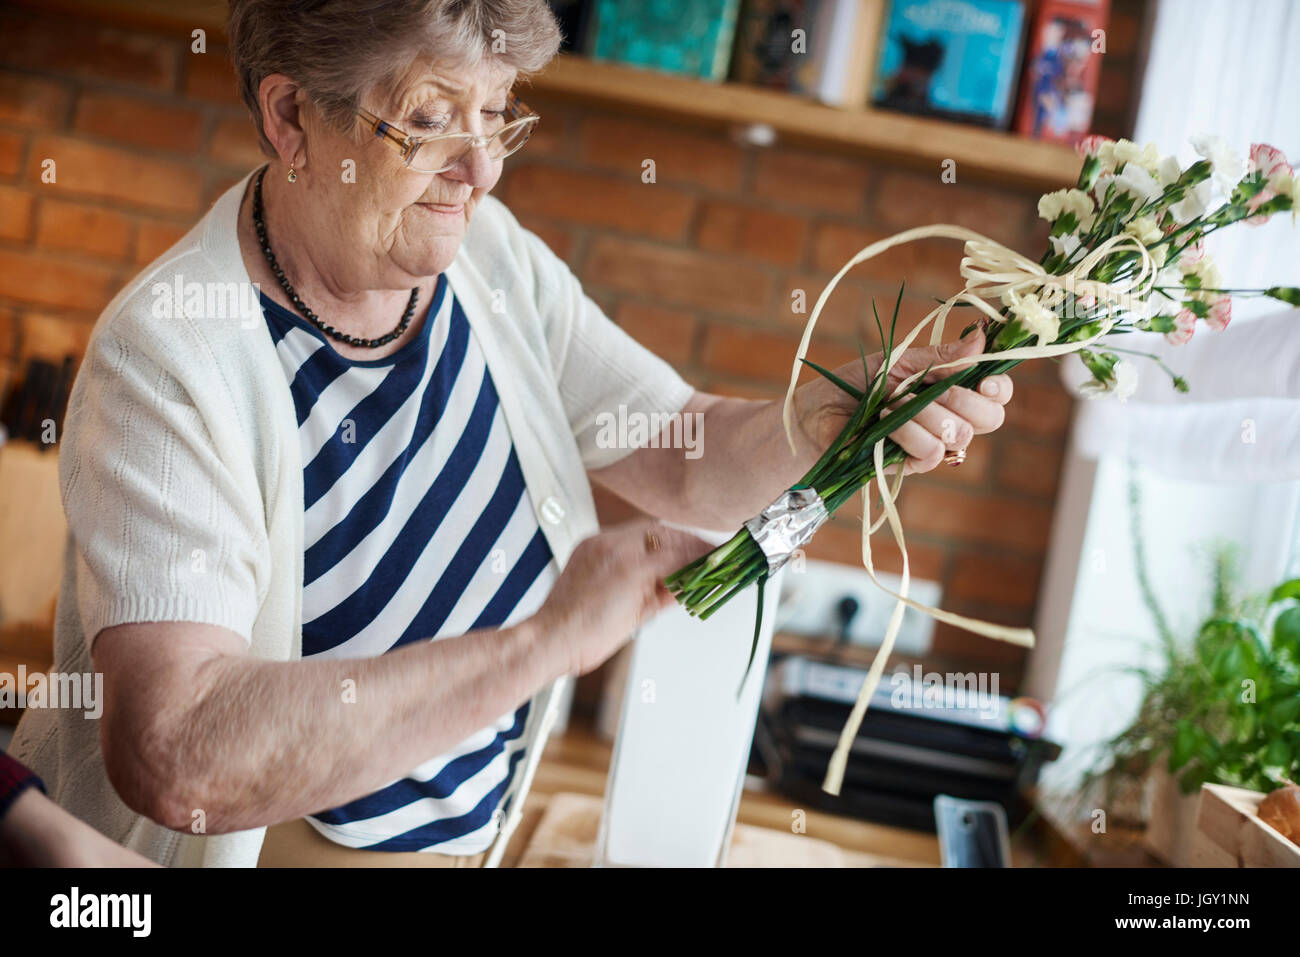 Senior adult woman with floral craftwork Stock Photo